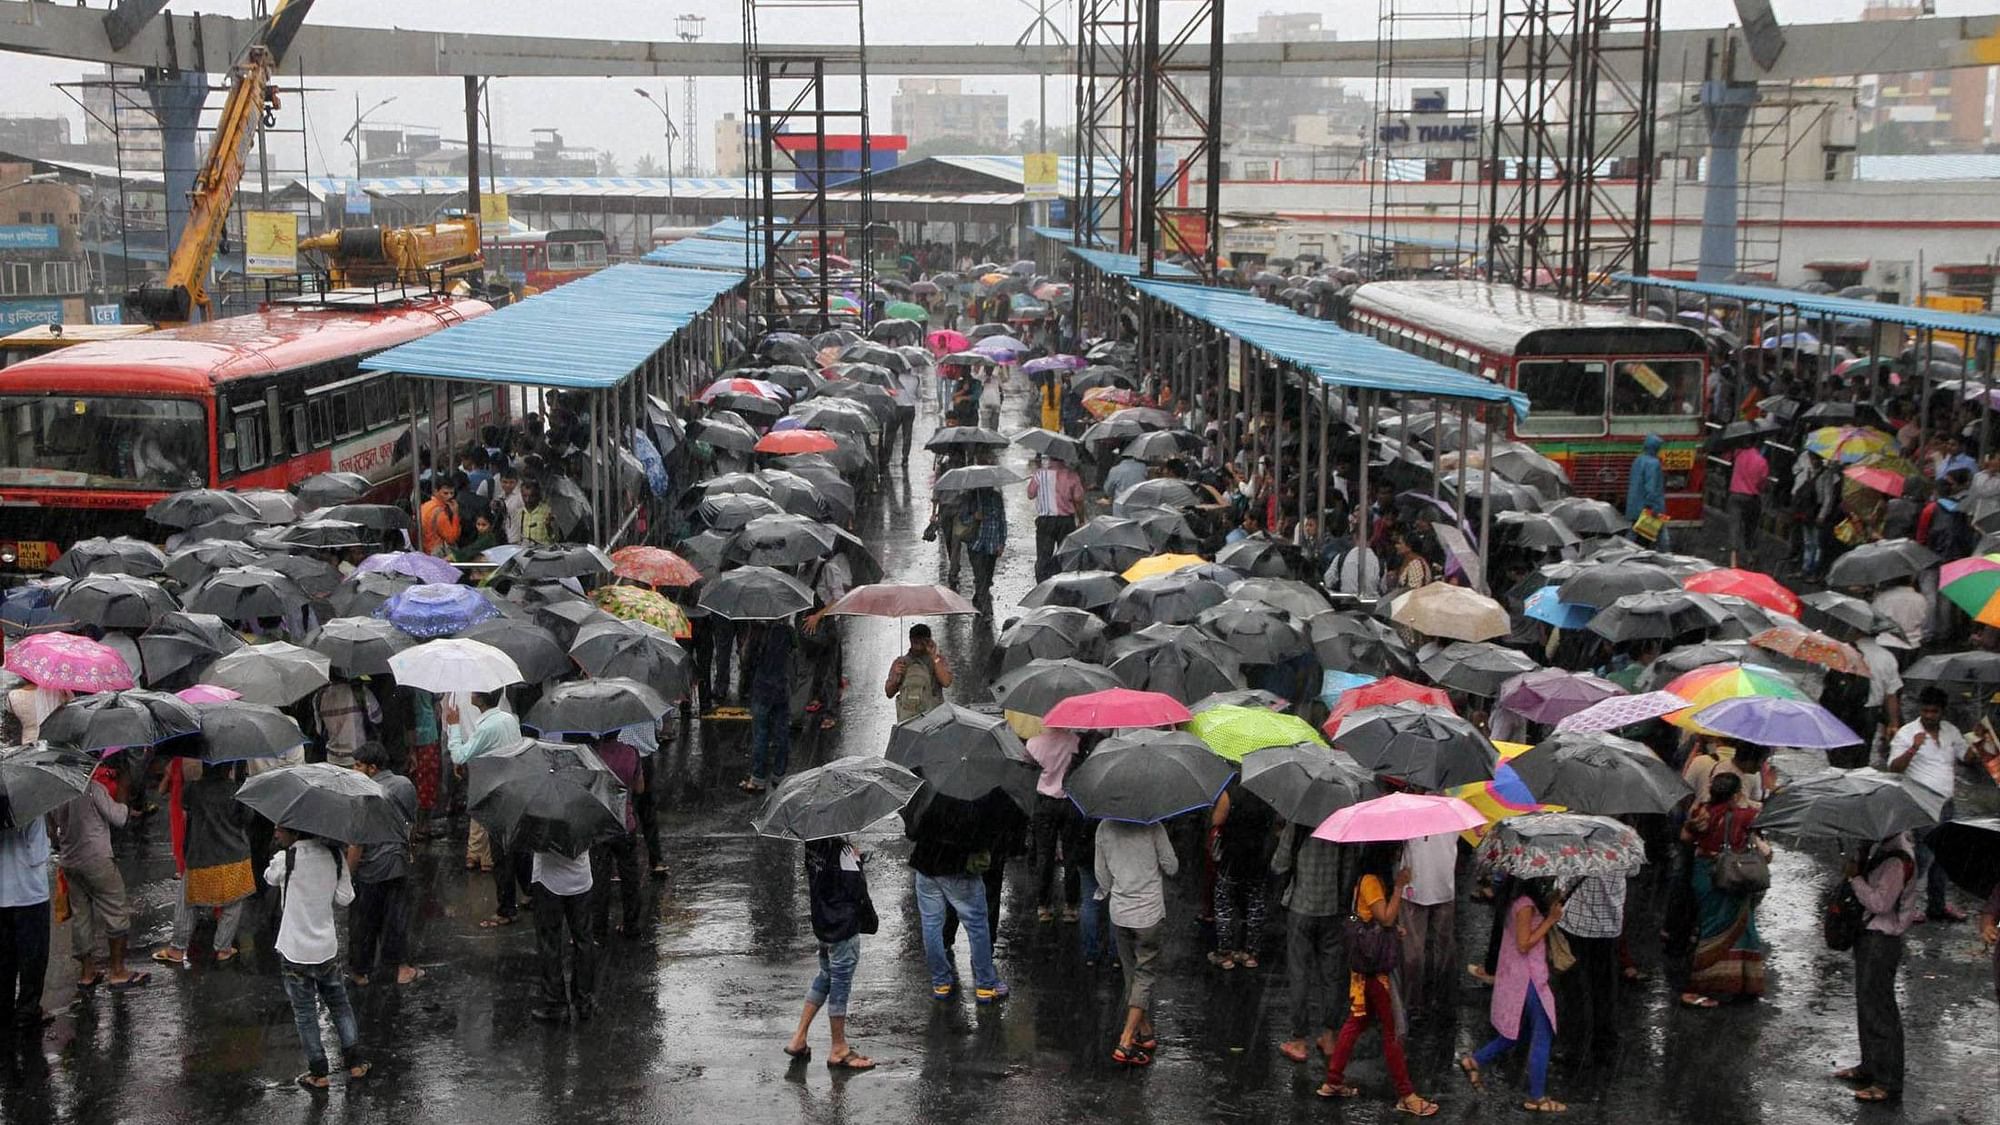 The India Meteorological Department said the onset of monsoon is likely to be delayed by a week and it is now expected to arrive only by 8 June.